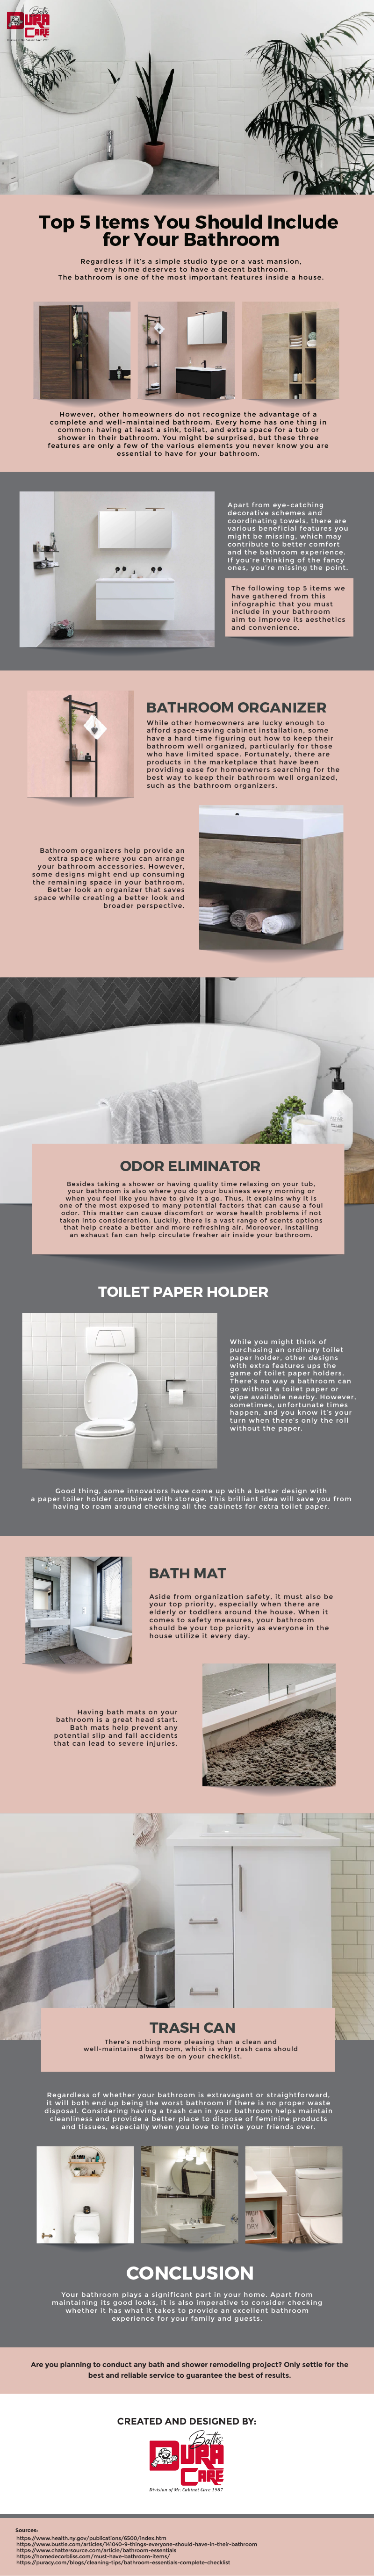 Top 5 Items You Should Include for Your Bathroom Infographic